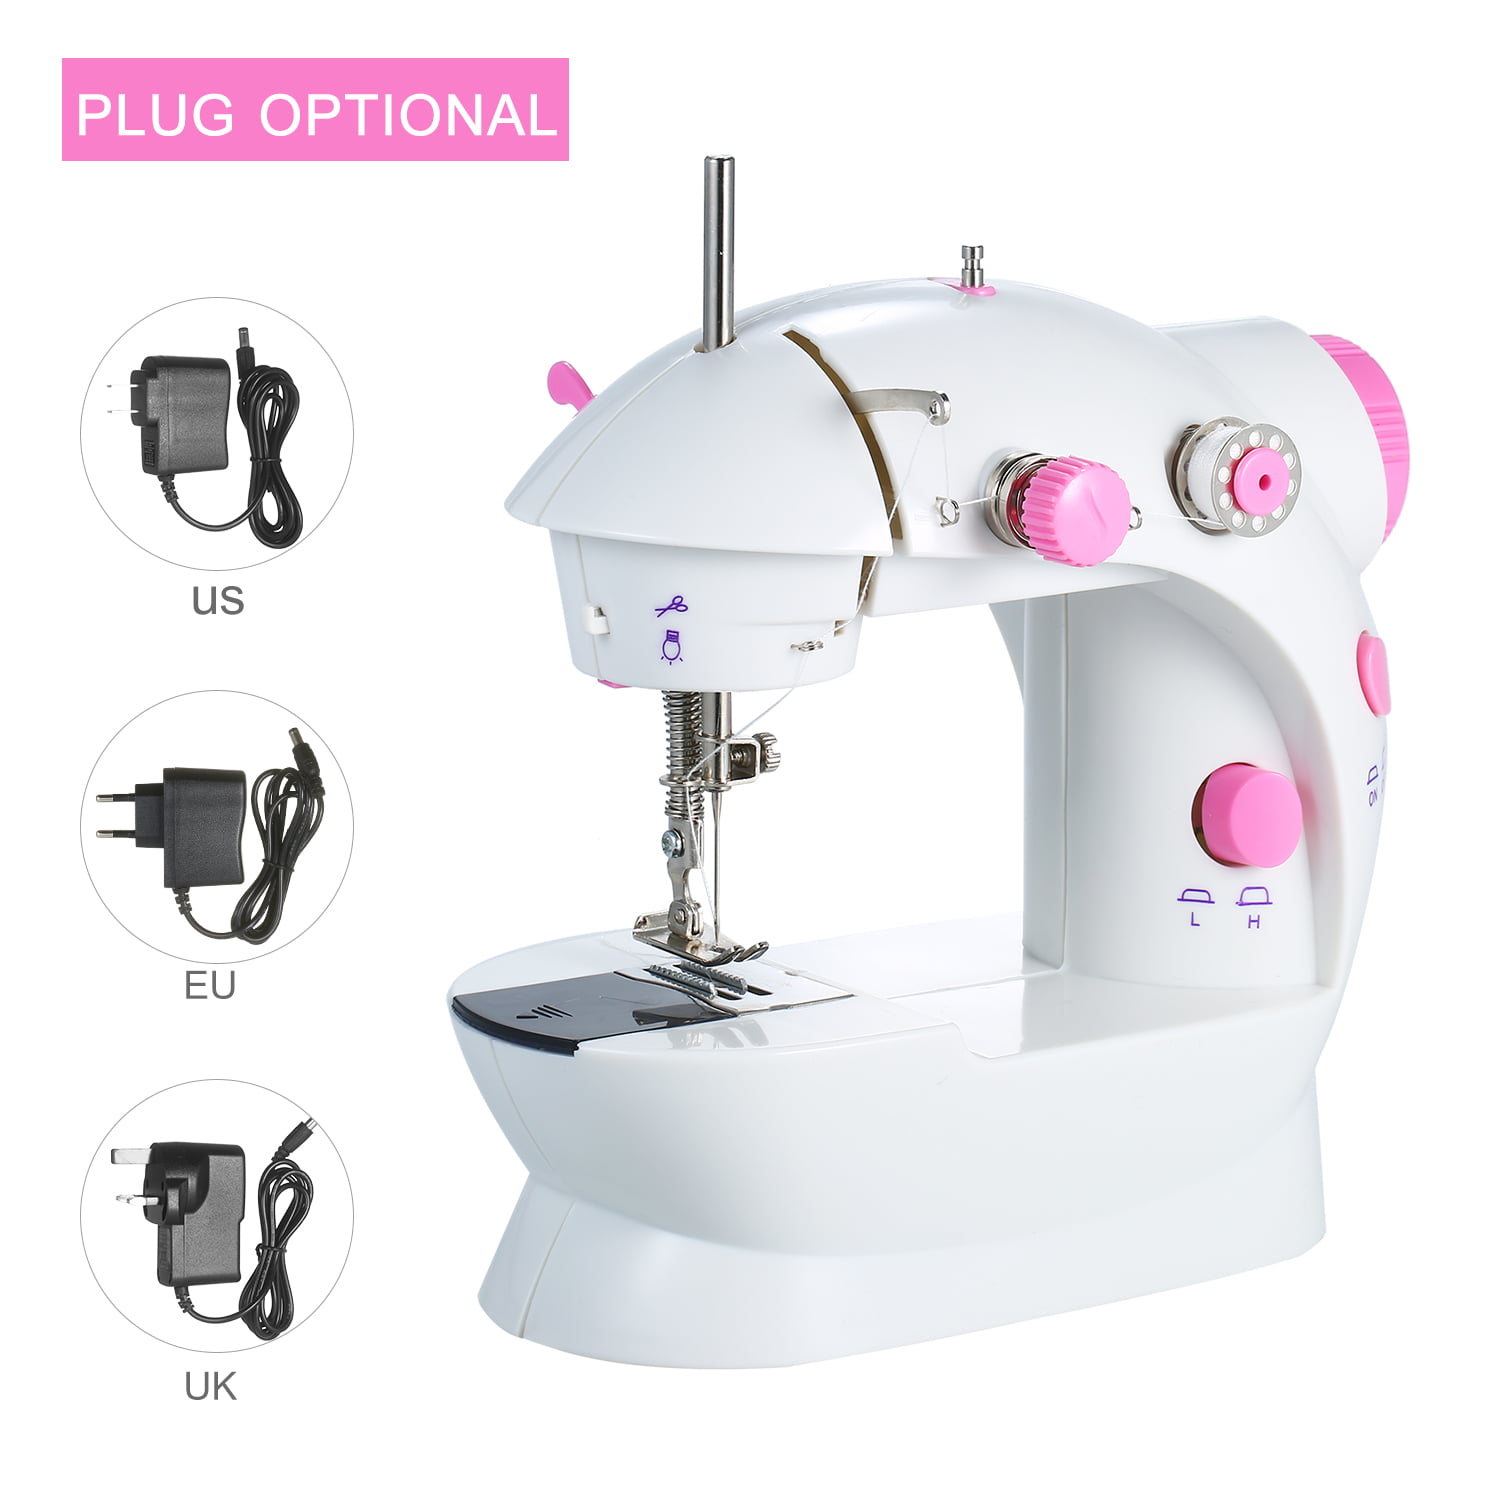 Mini Sewing Machine, Portable Multi-Purpose Crafting Mending Machine  Household 2-Speed Double Thread with Lights and Cutter Foot Pedal for  Beginners